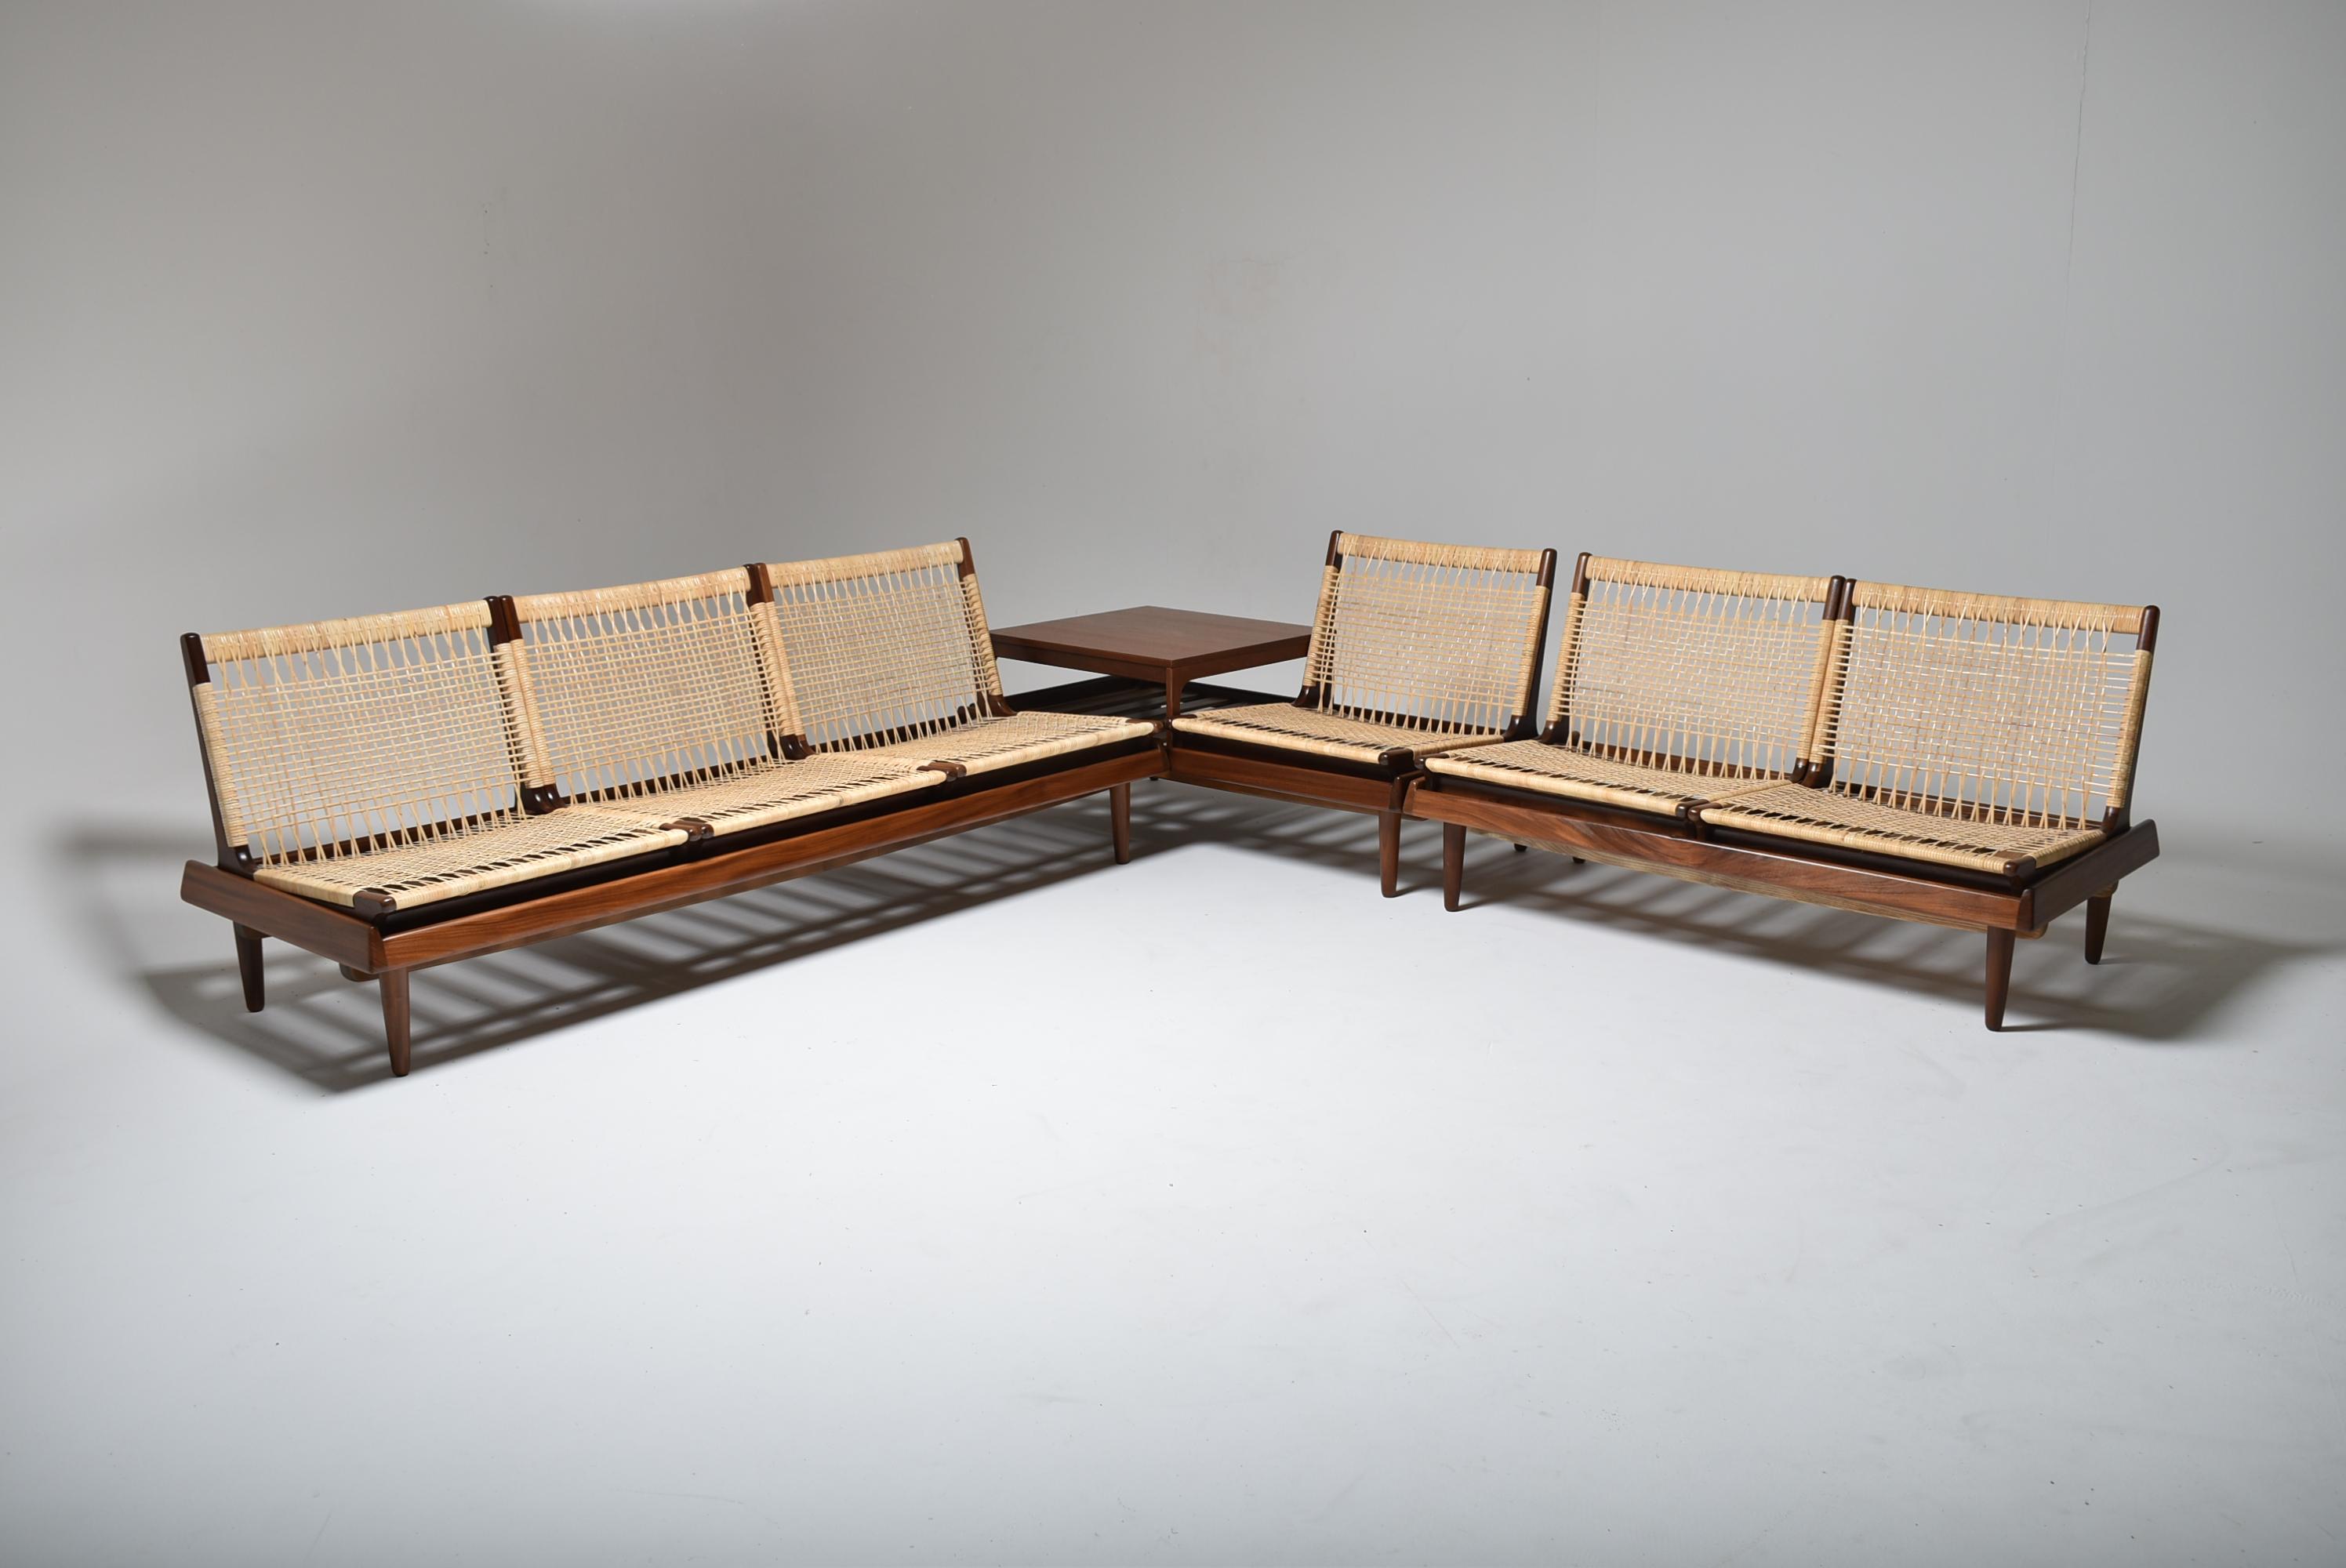 
Modular set by Hans HOLSEN for Bramin, teak structures. 
New canework in rattan, comprising a 3-seater bench, two 2-seater benches, 6 seaters and a coffee table. 
One cushion per seat, completely restored fabric and upholstery.  